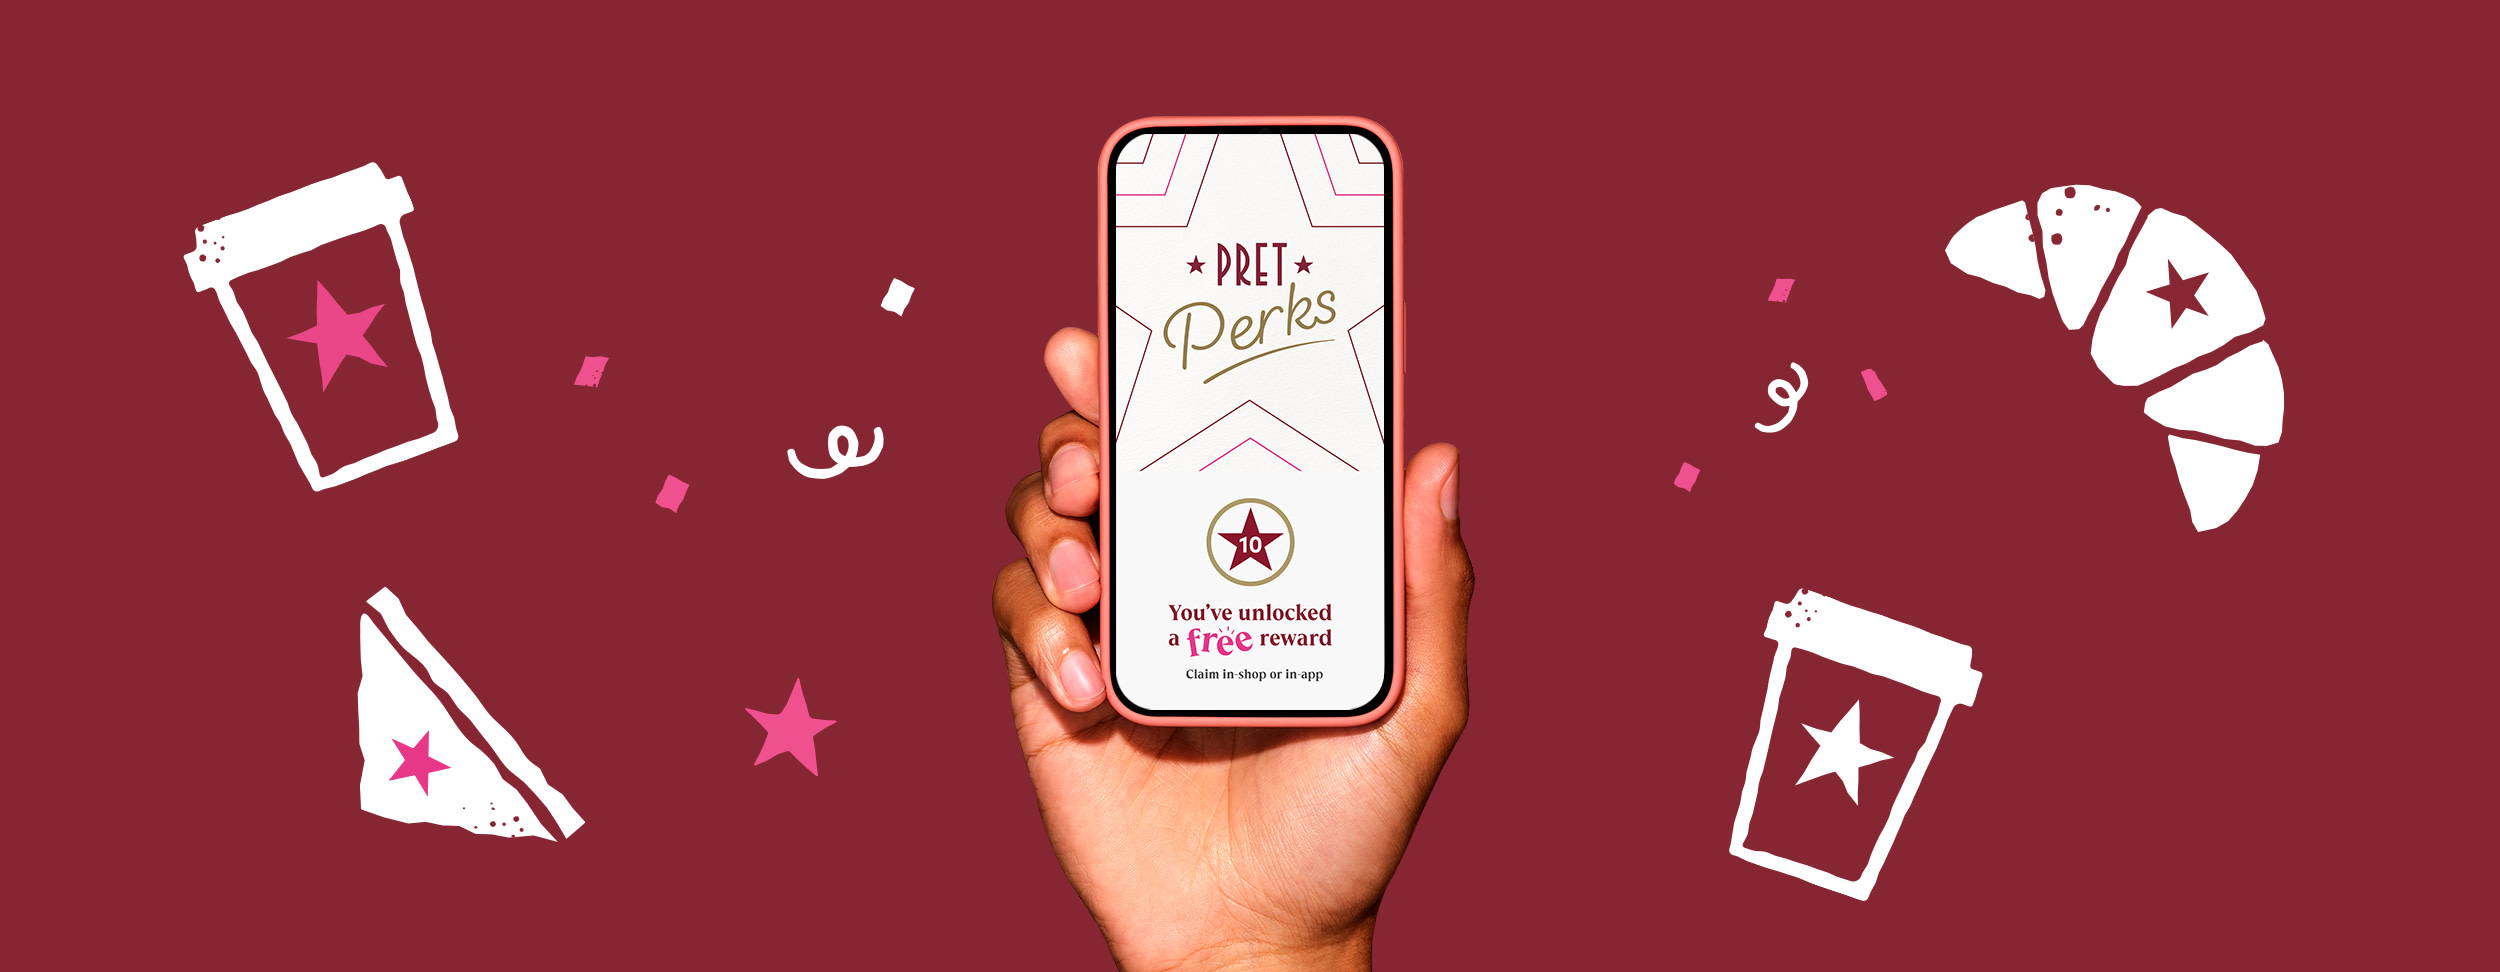 Say hello to the Pret app